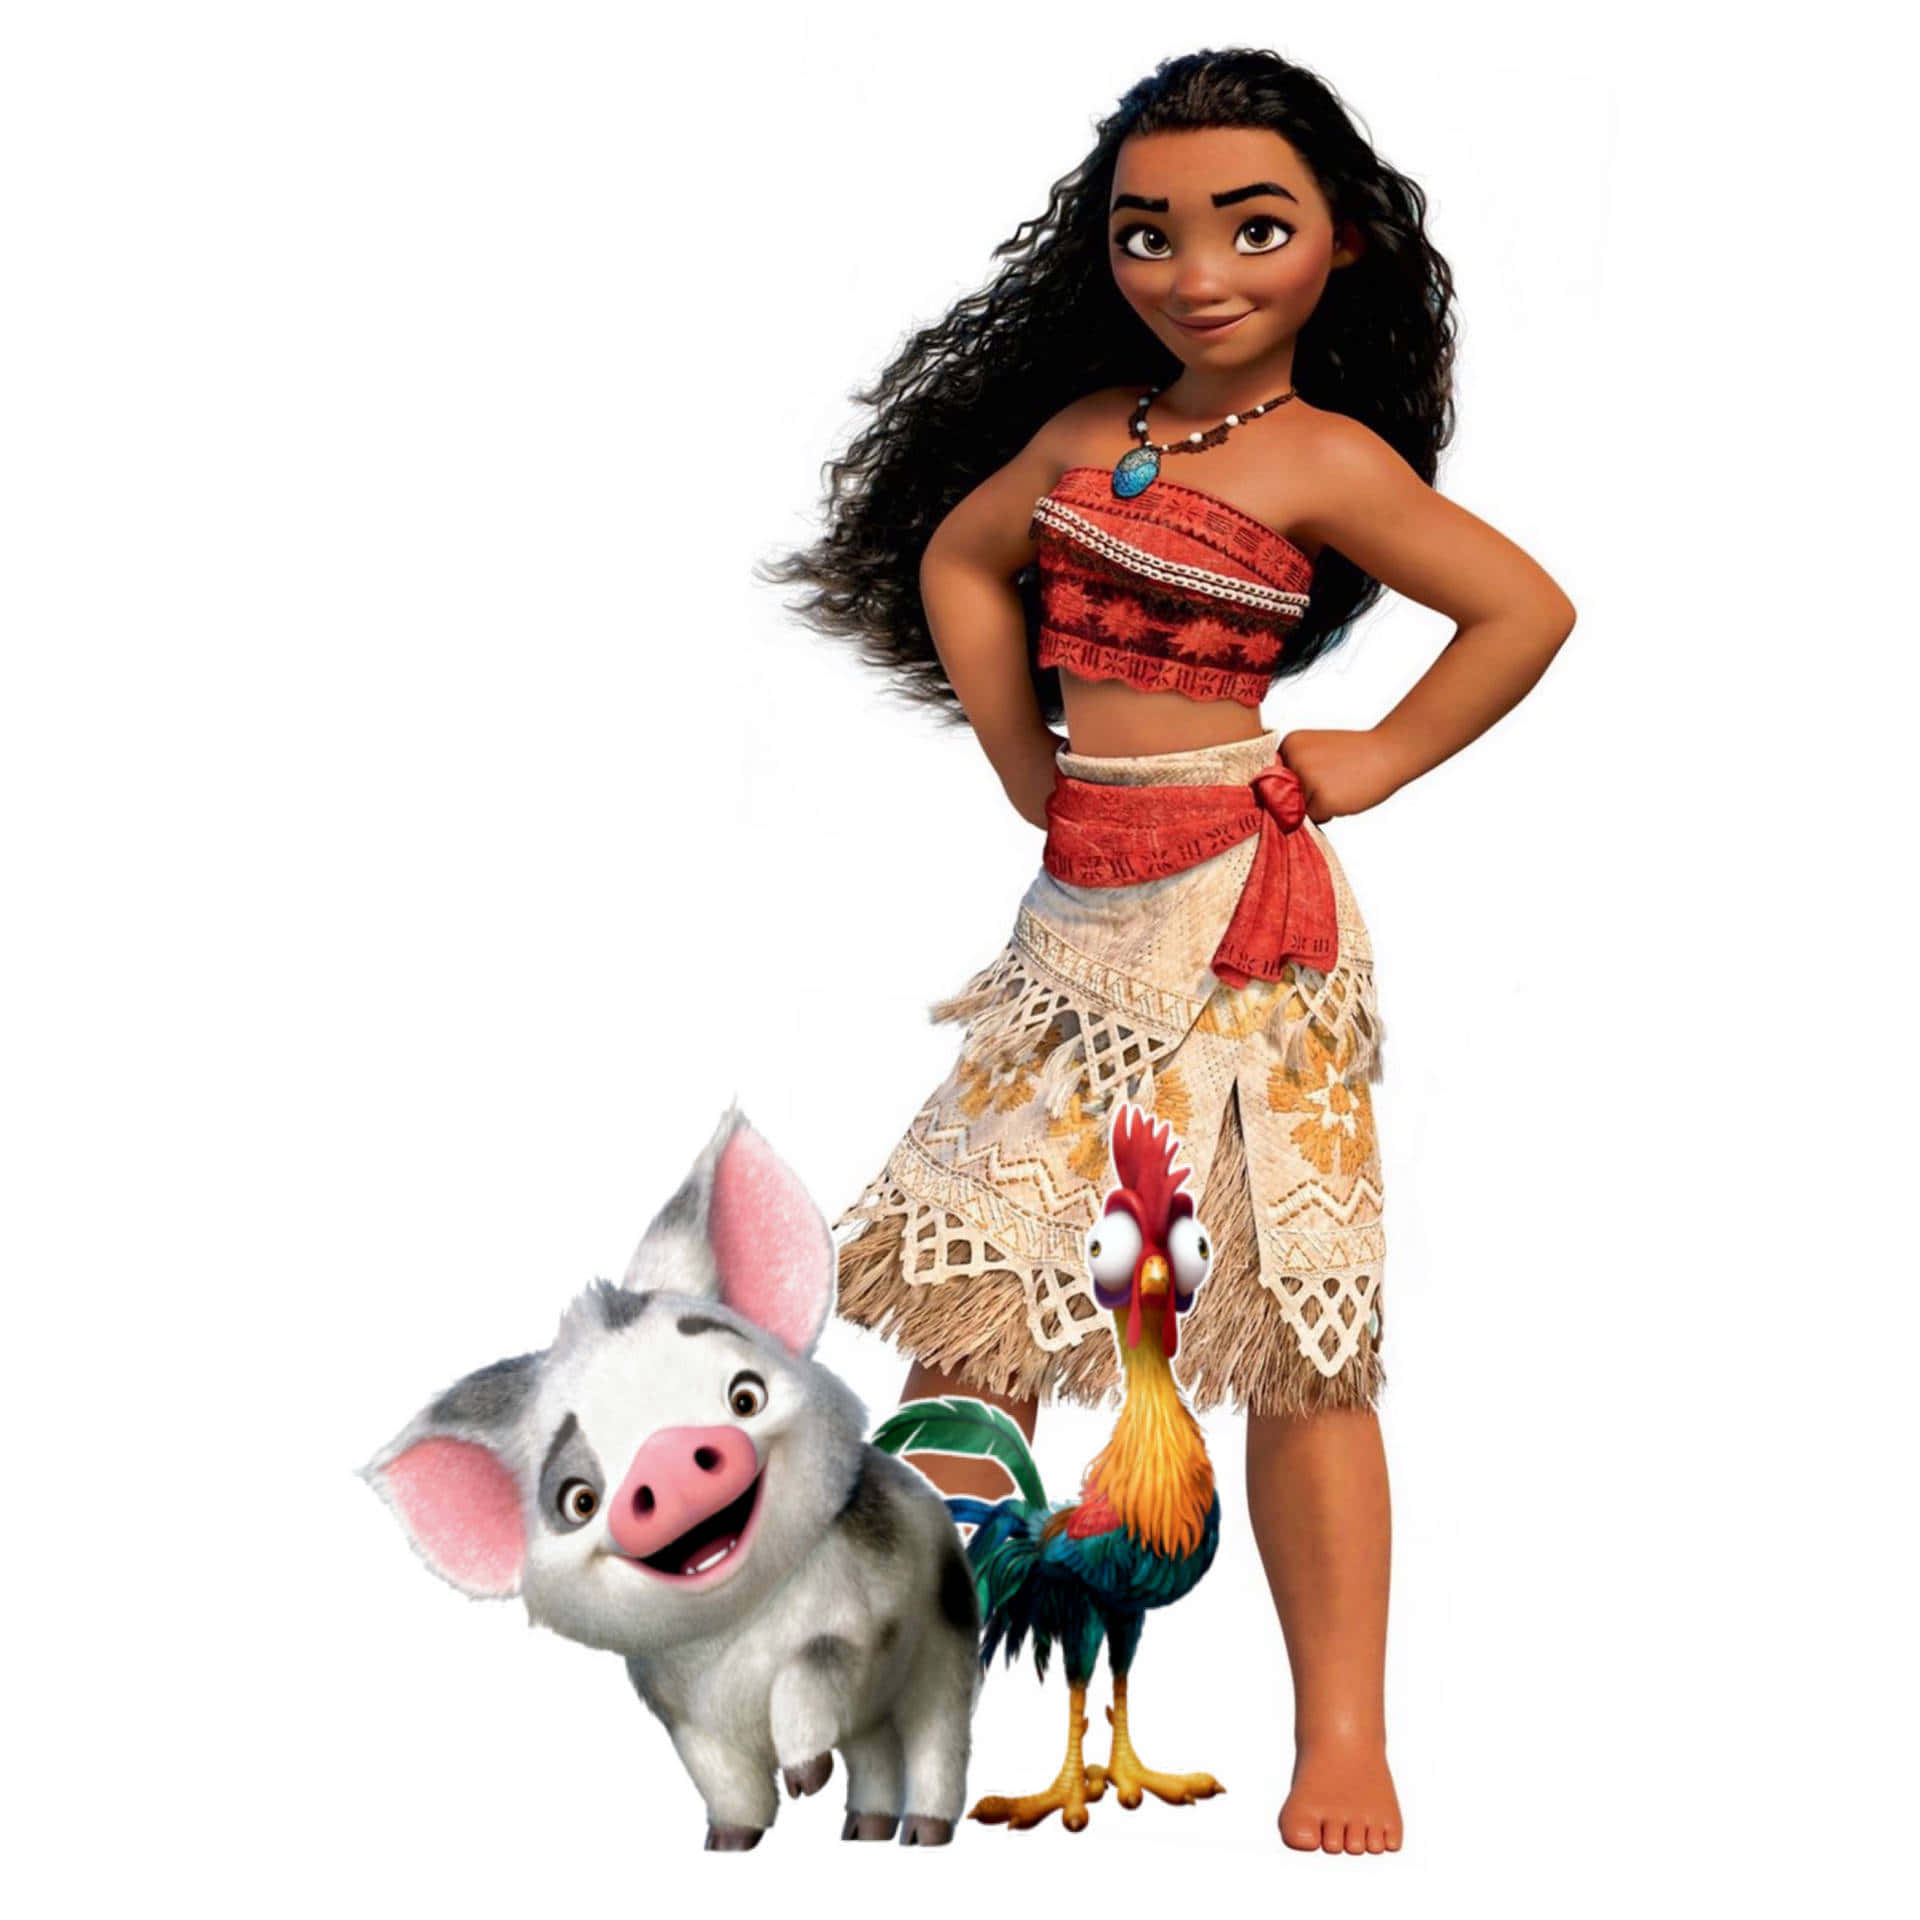 Moanaand Friends Animated Characters Wallpaper